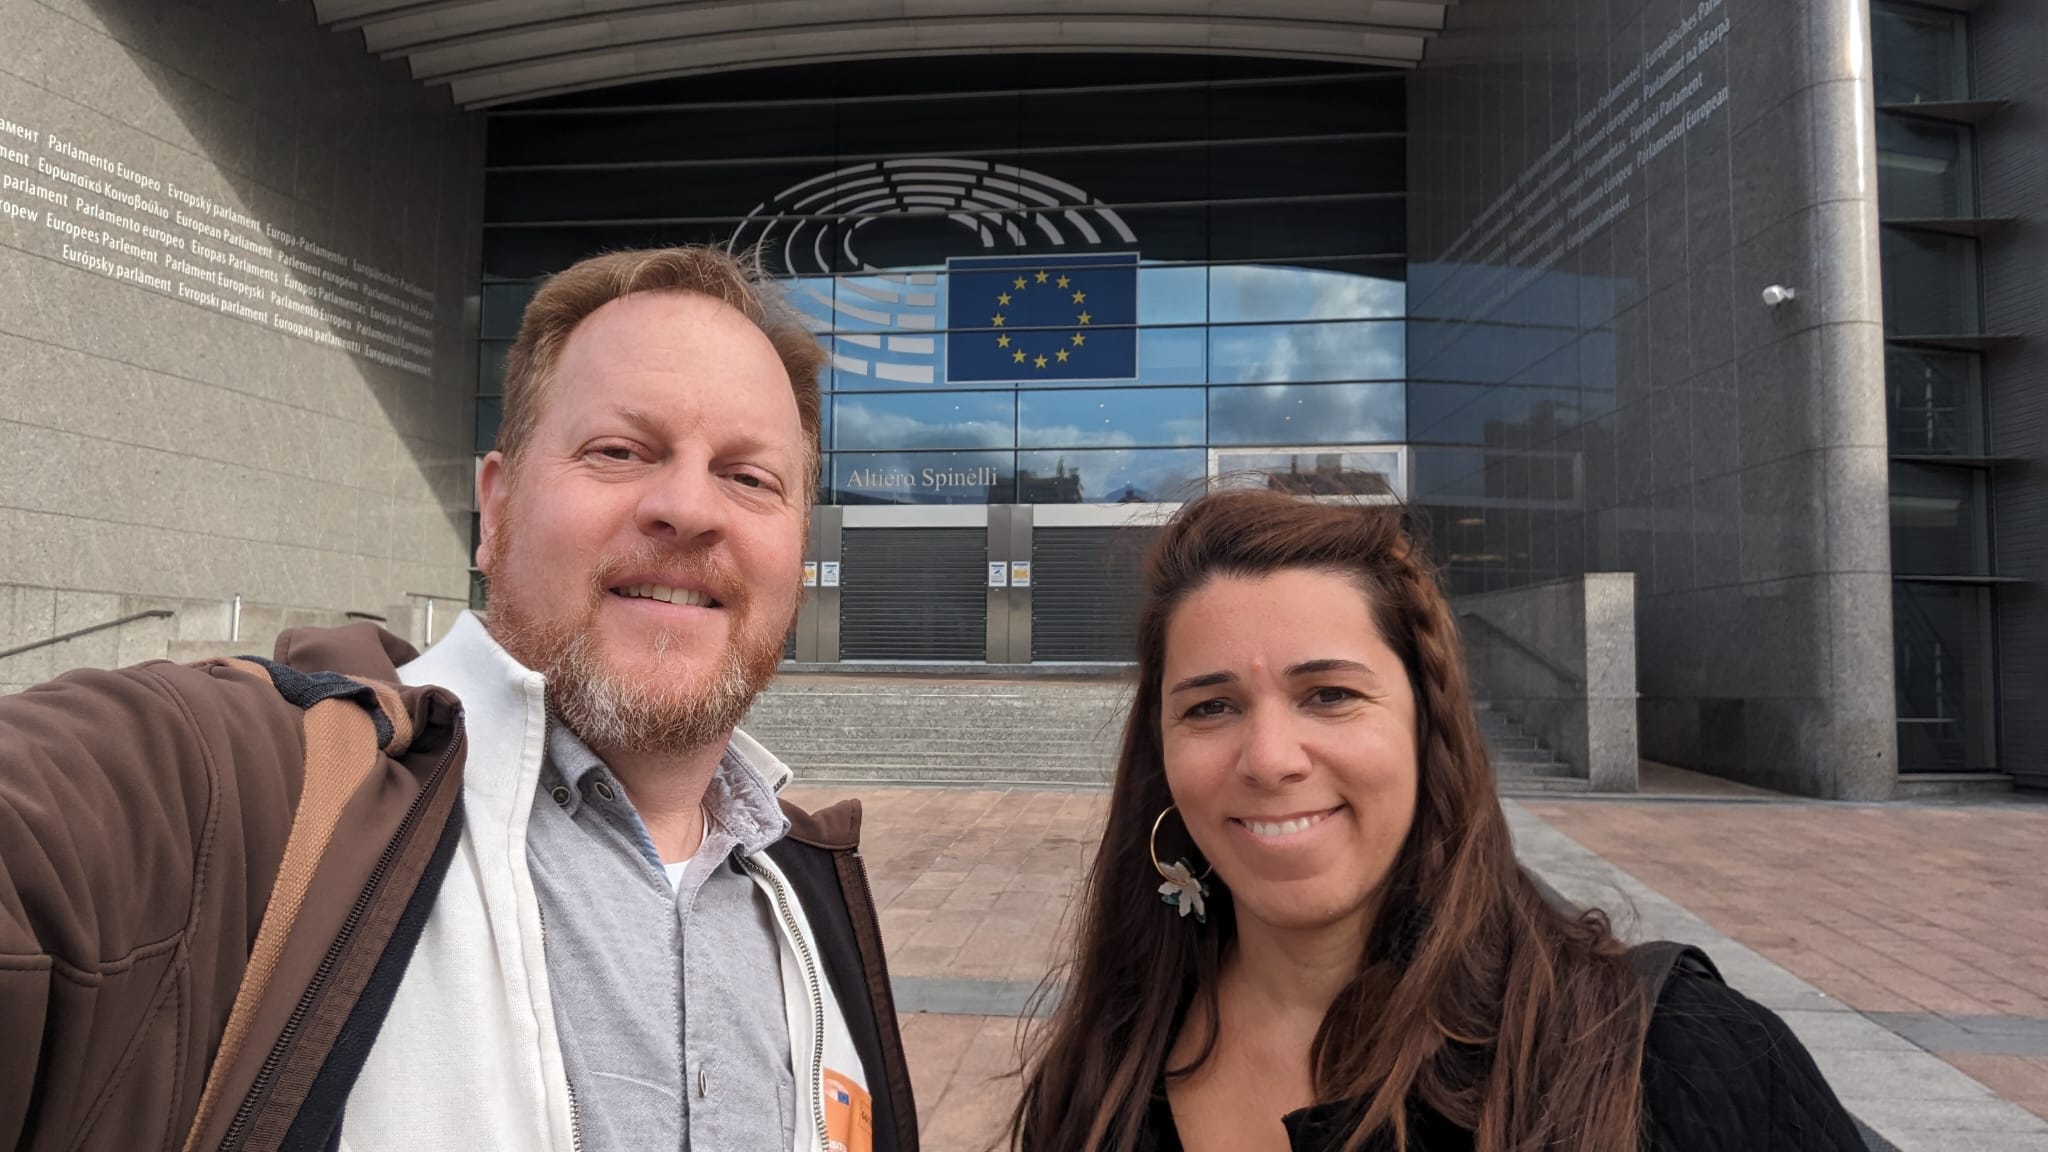 Jason and Joana in front of the EU Parliament